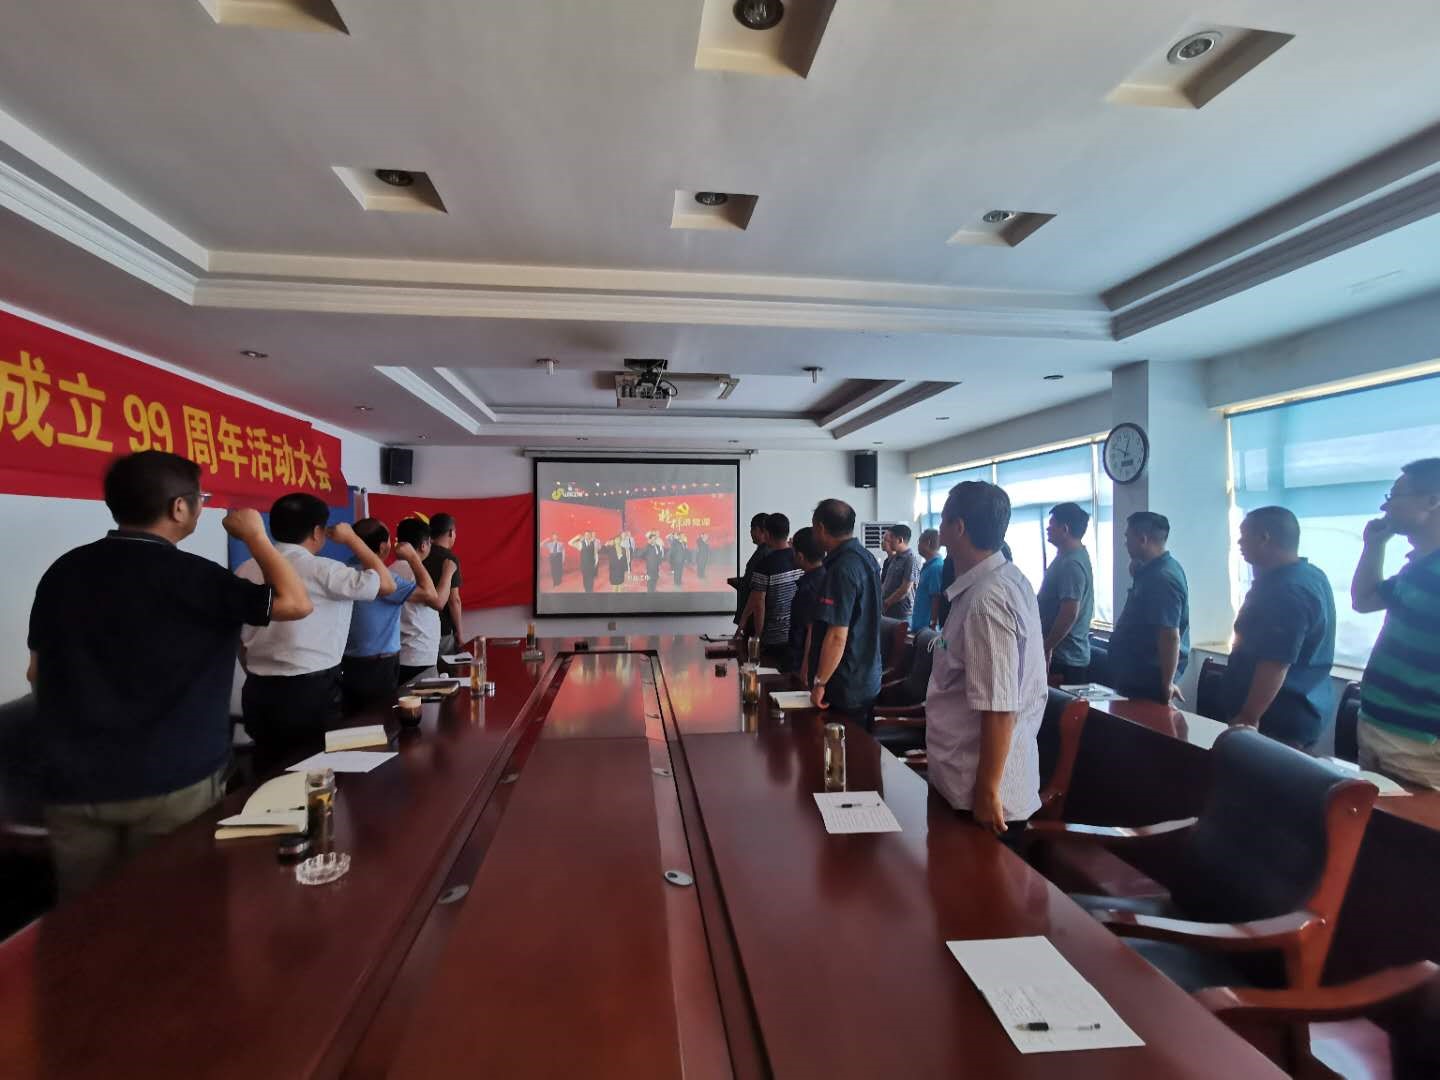 Celebrating July 1st | Dongyue Company organized a theme party day event to celebrate the 99th anniversary of the founding of the party